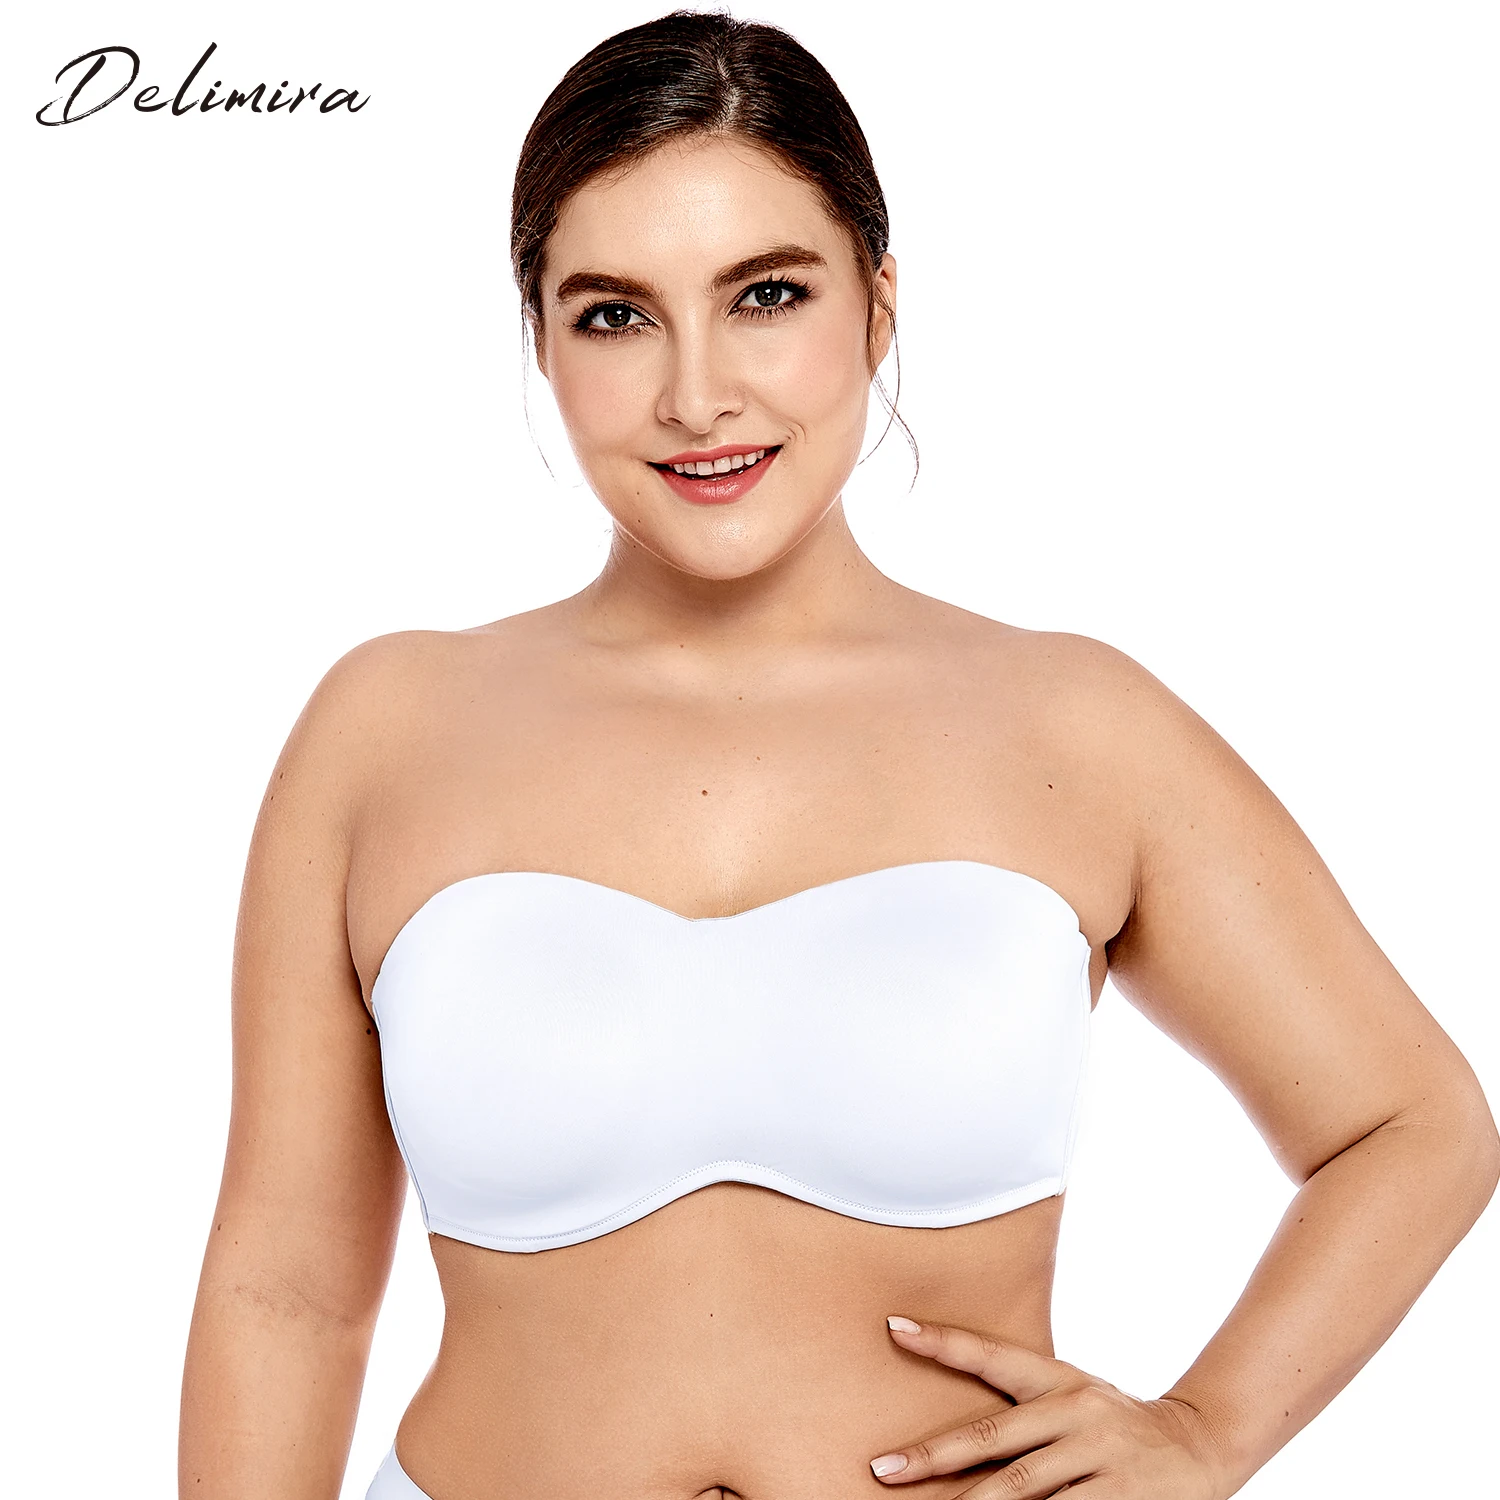  Delimira Women's Plus Size Smooth Seamless Invisible Full Coverage Underwire Minimizer Strapless Br